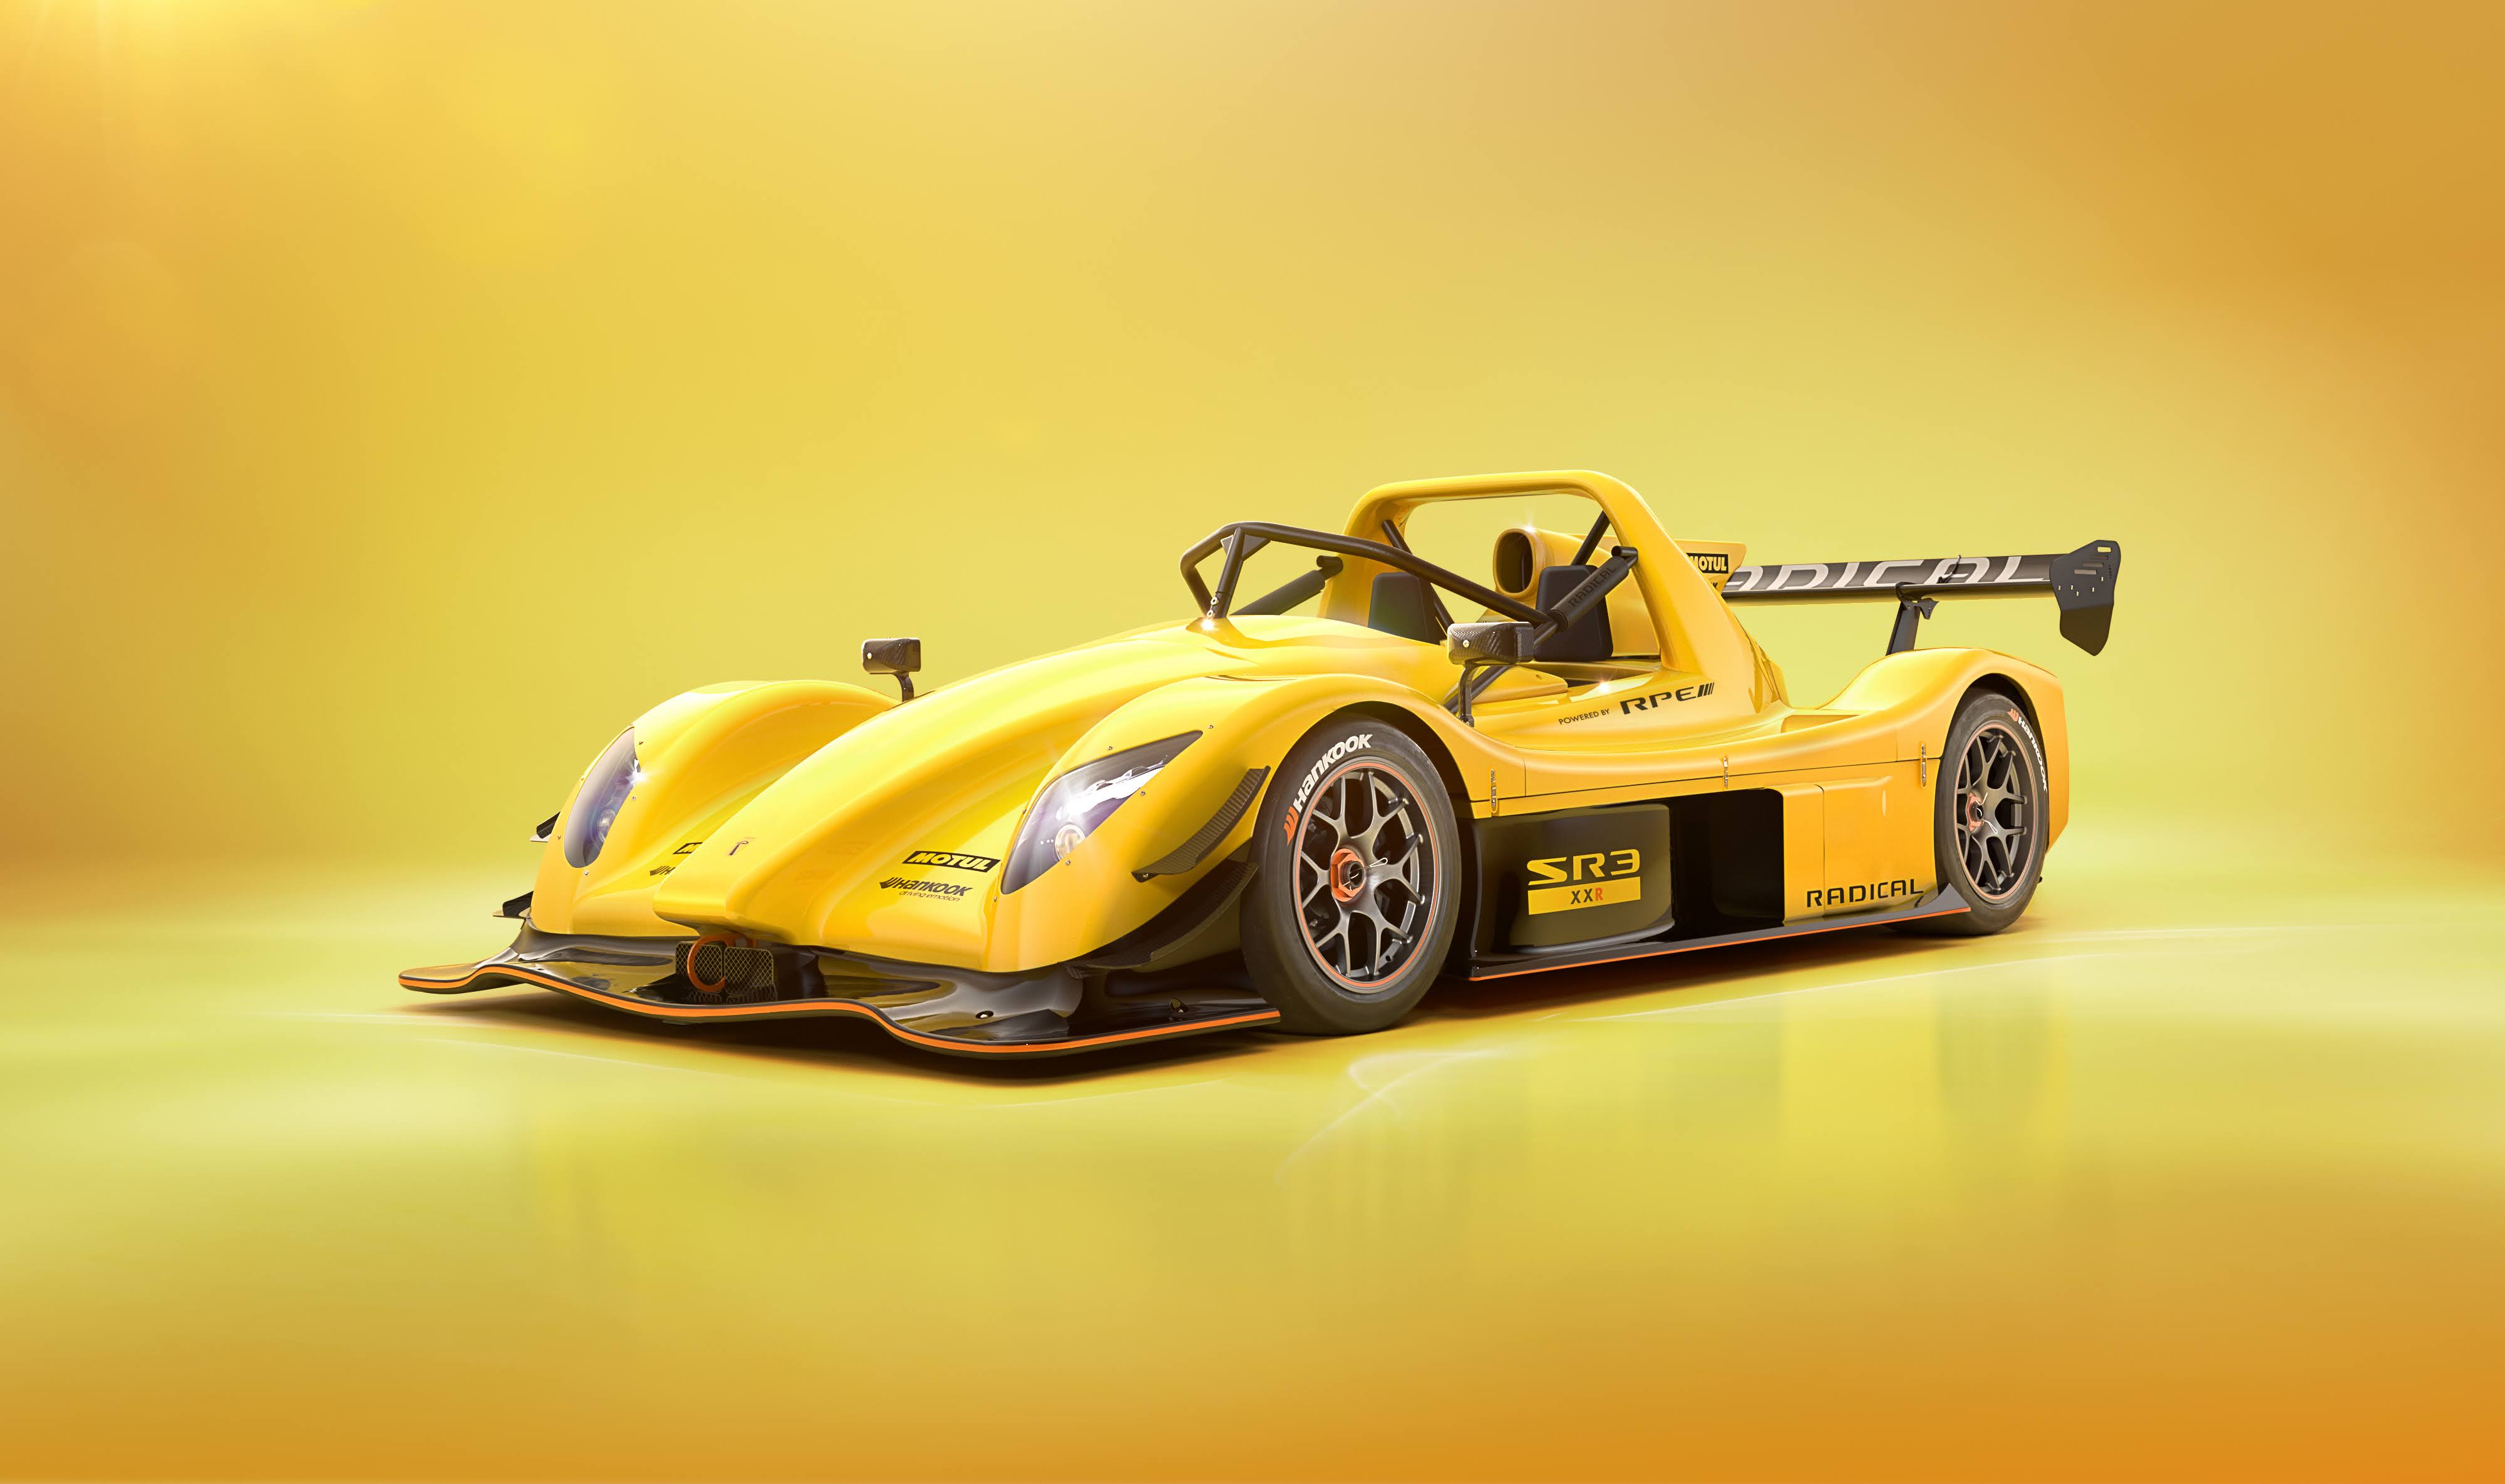 Radical RXC Radical RS3 Car Vehicle Motorsport Yellow Cars Yellow Background Reflection Race Cars Si 4000x2370